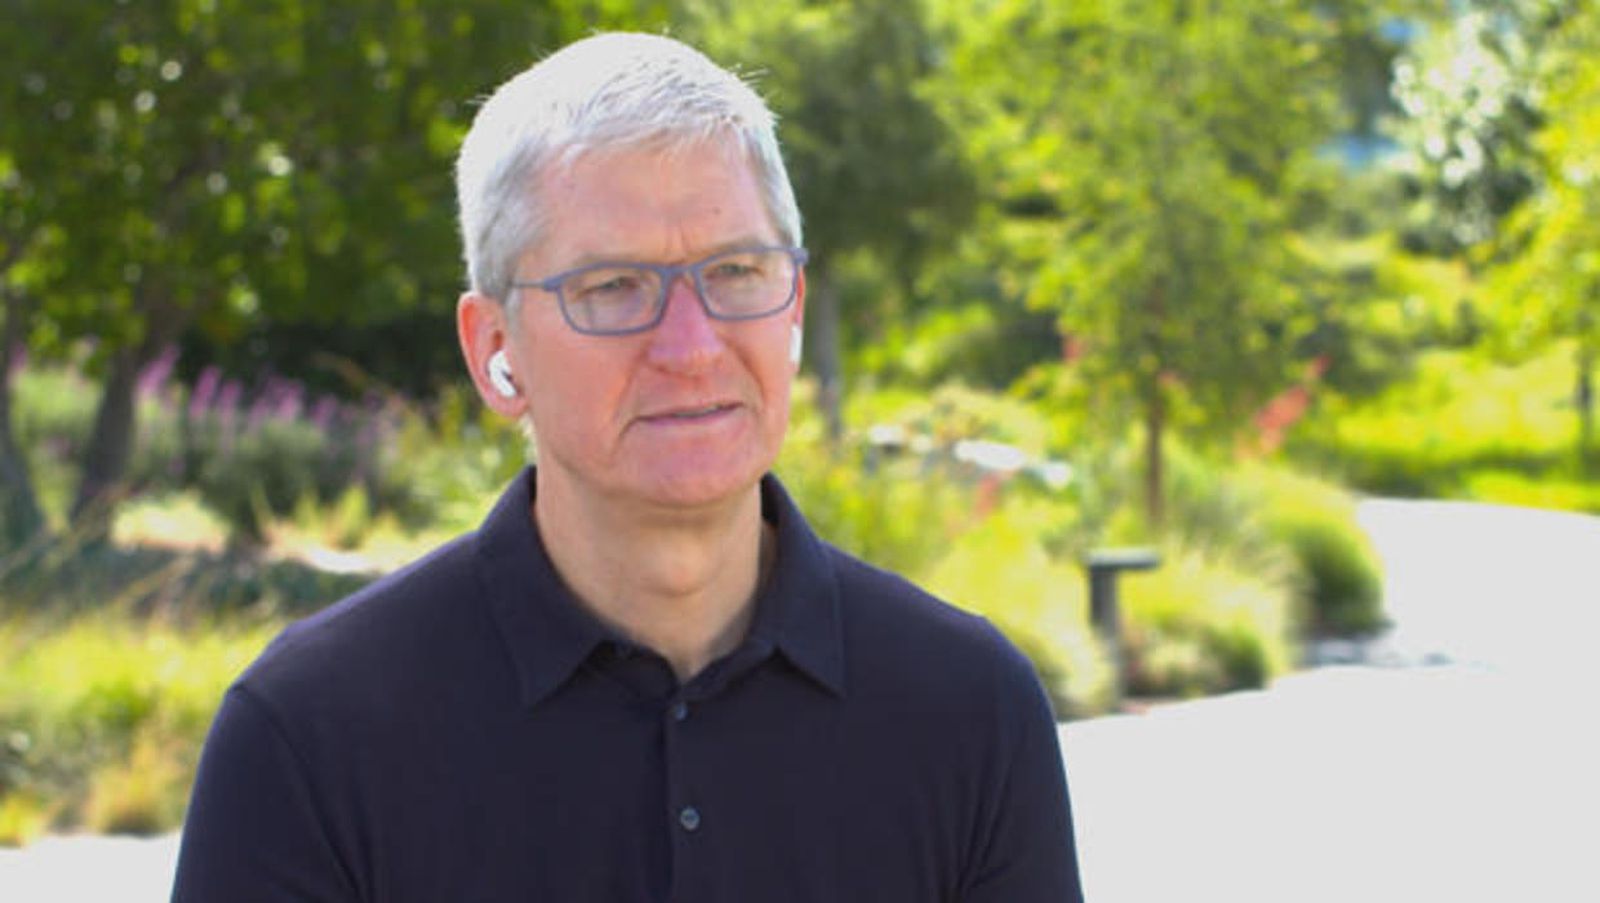 Tim Cook calls for a ‘lasting and hopeful future for all’ in Wall Street Journal Op-Ed